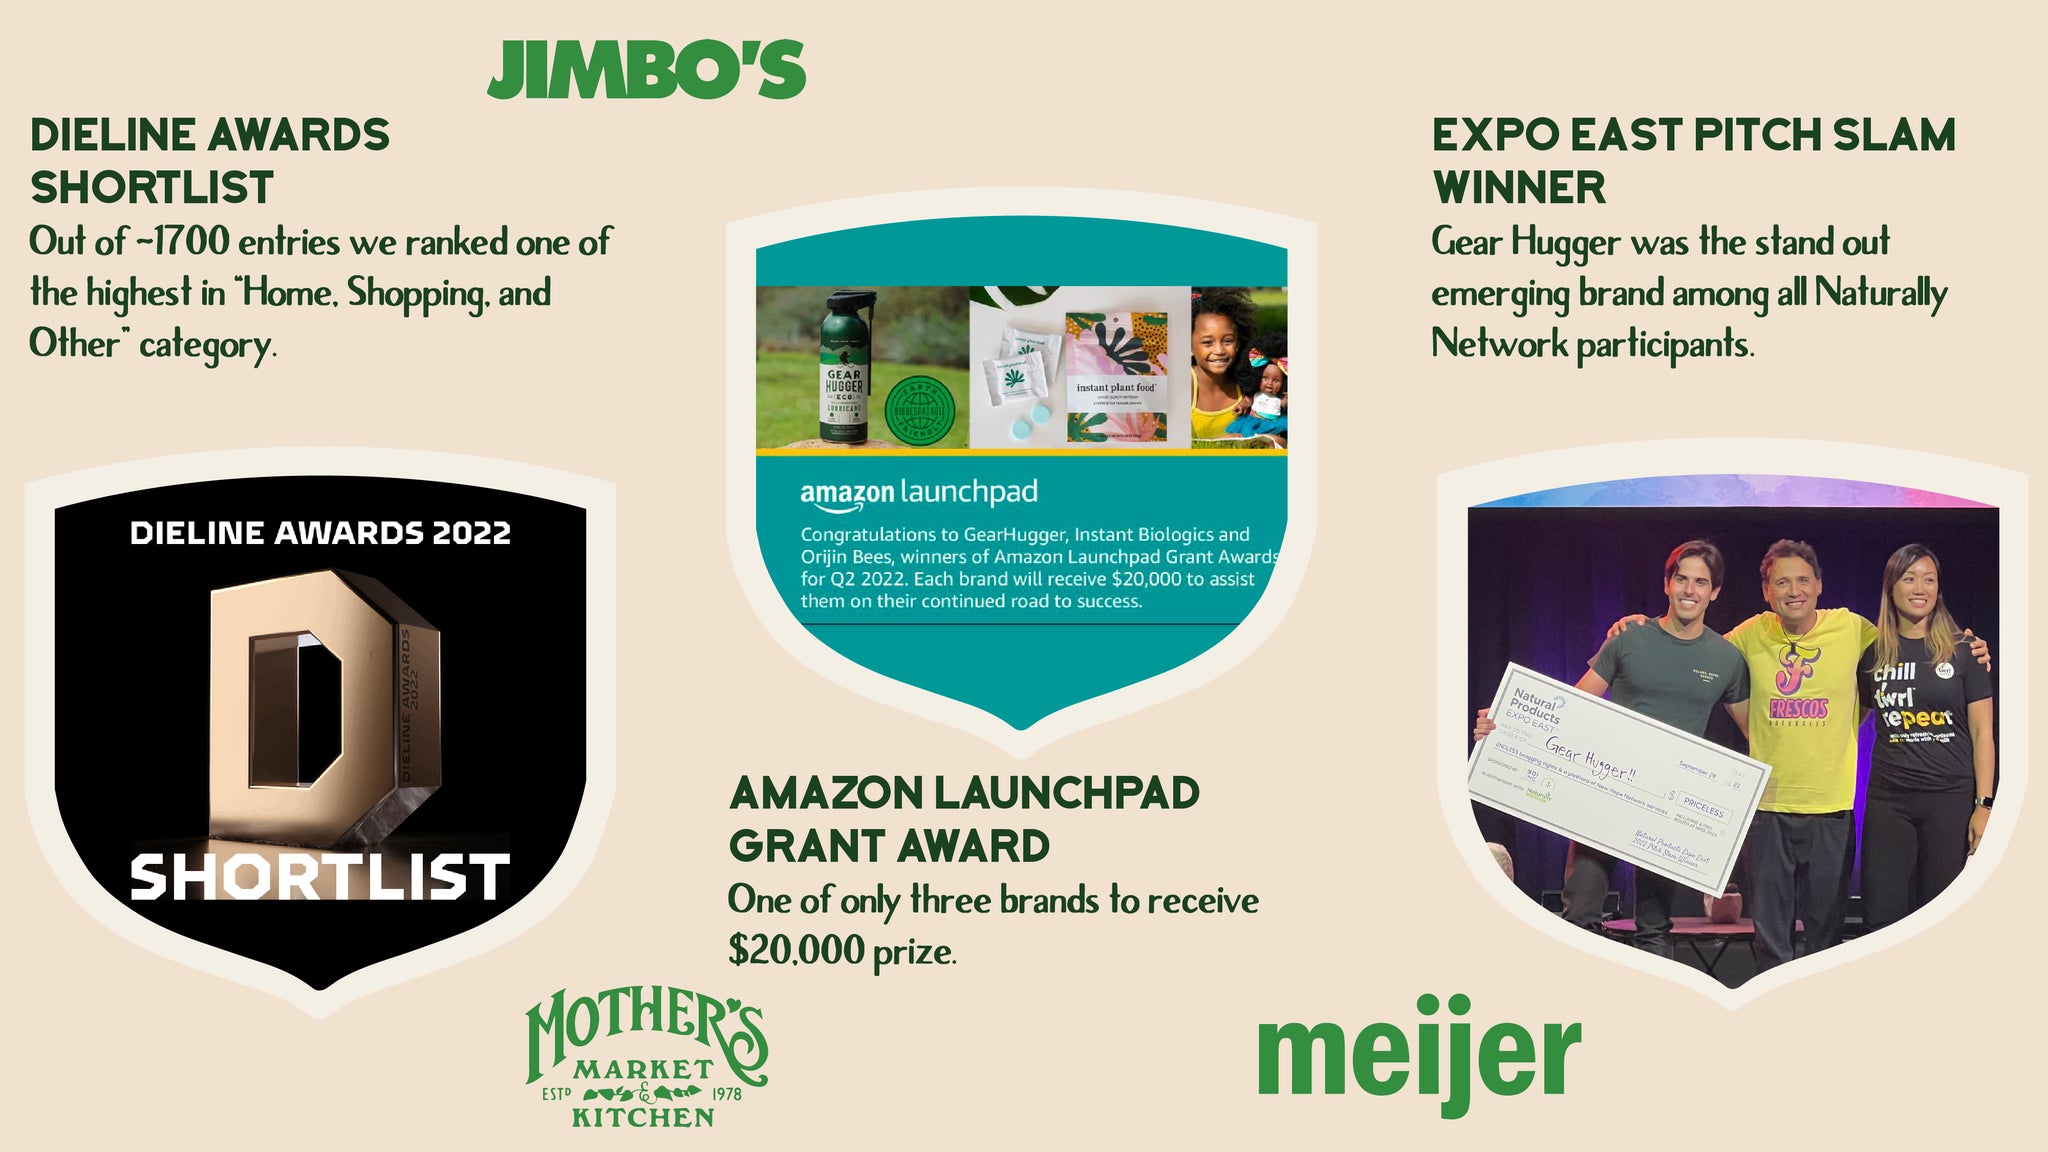 Dieline Awards Shortlist Out of ~1700 entries we ranked one of the highest in “Home, Shopping and Other” category. Amazon Launchpad Grant Award One of only three brands to receive $20,000 prize. Expo East Pitch Slam Winner Gear Hugger was the stand out emerging brand among all Naturally Network participants